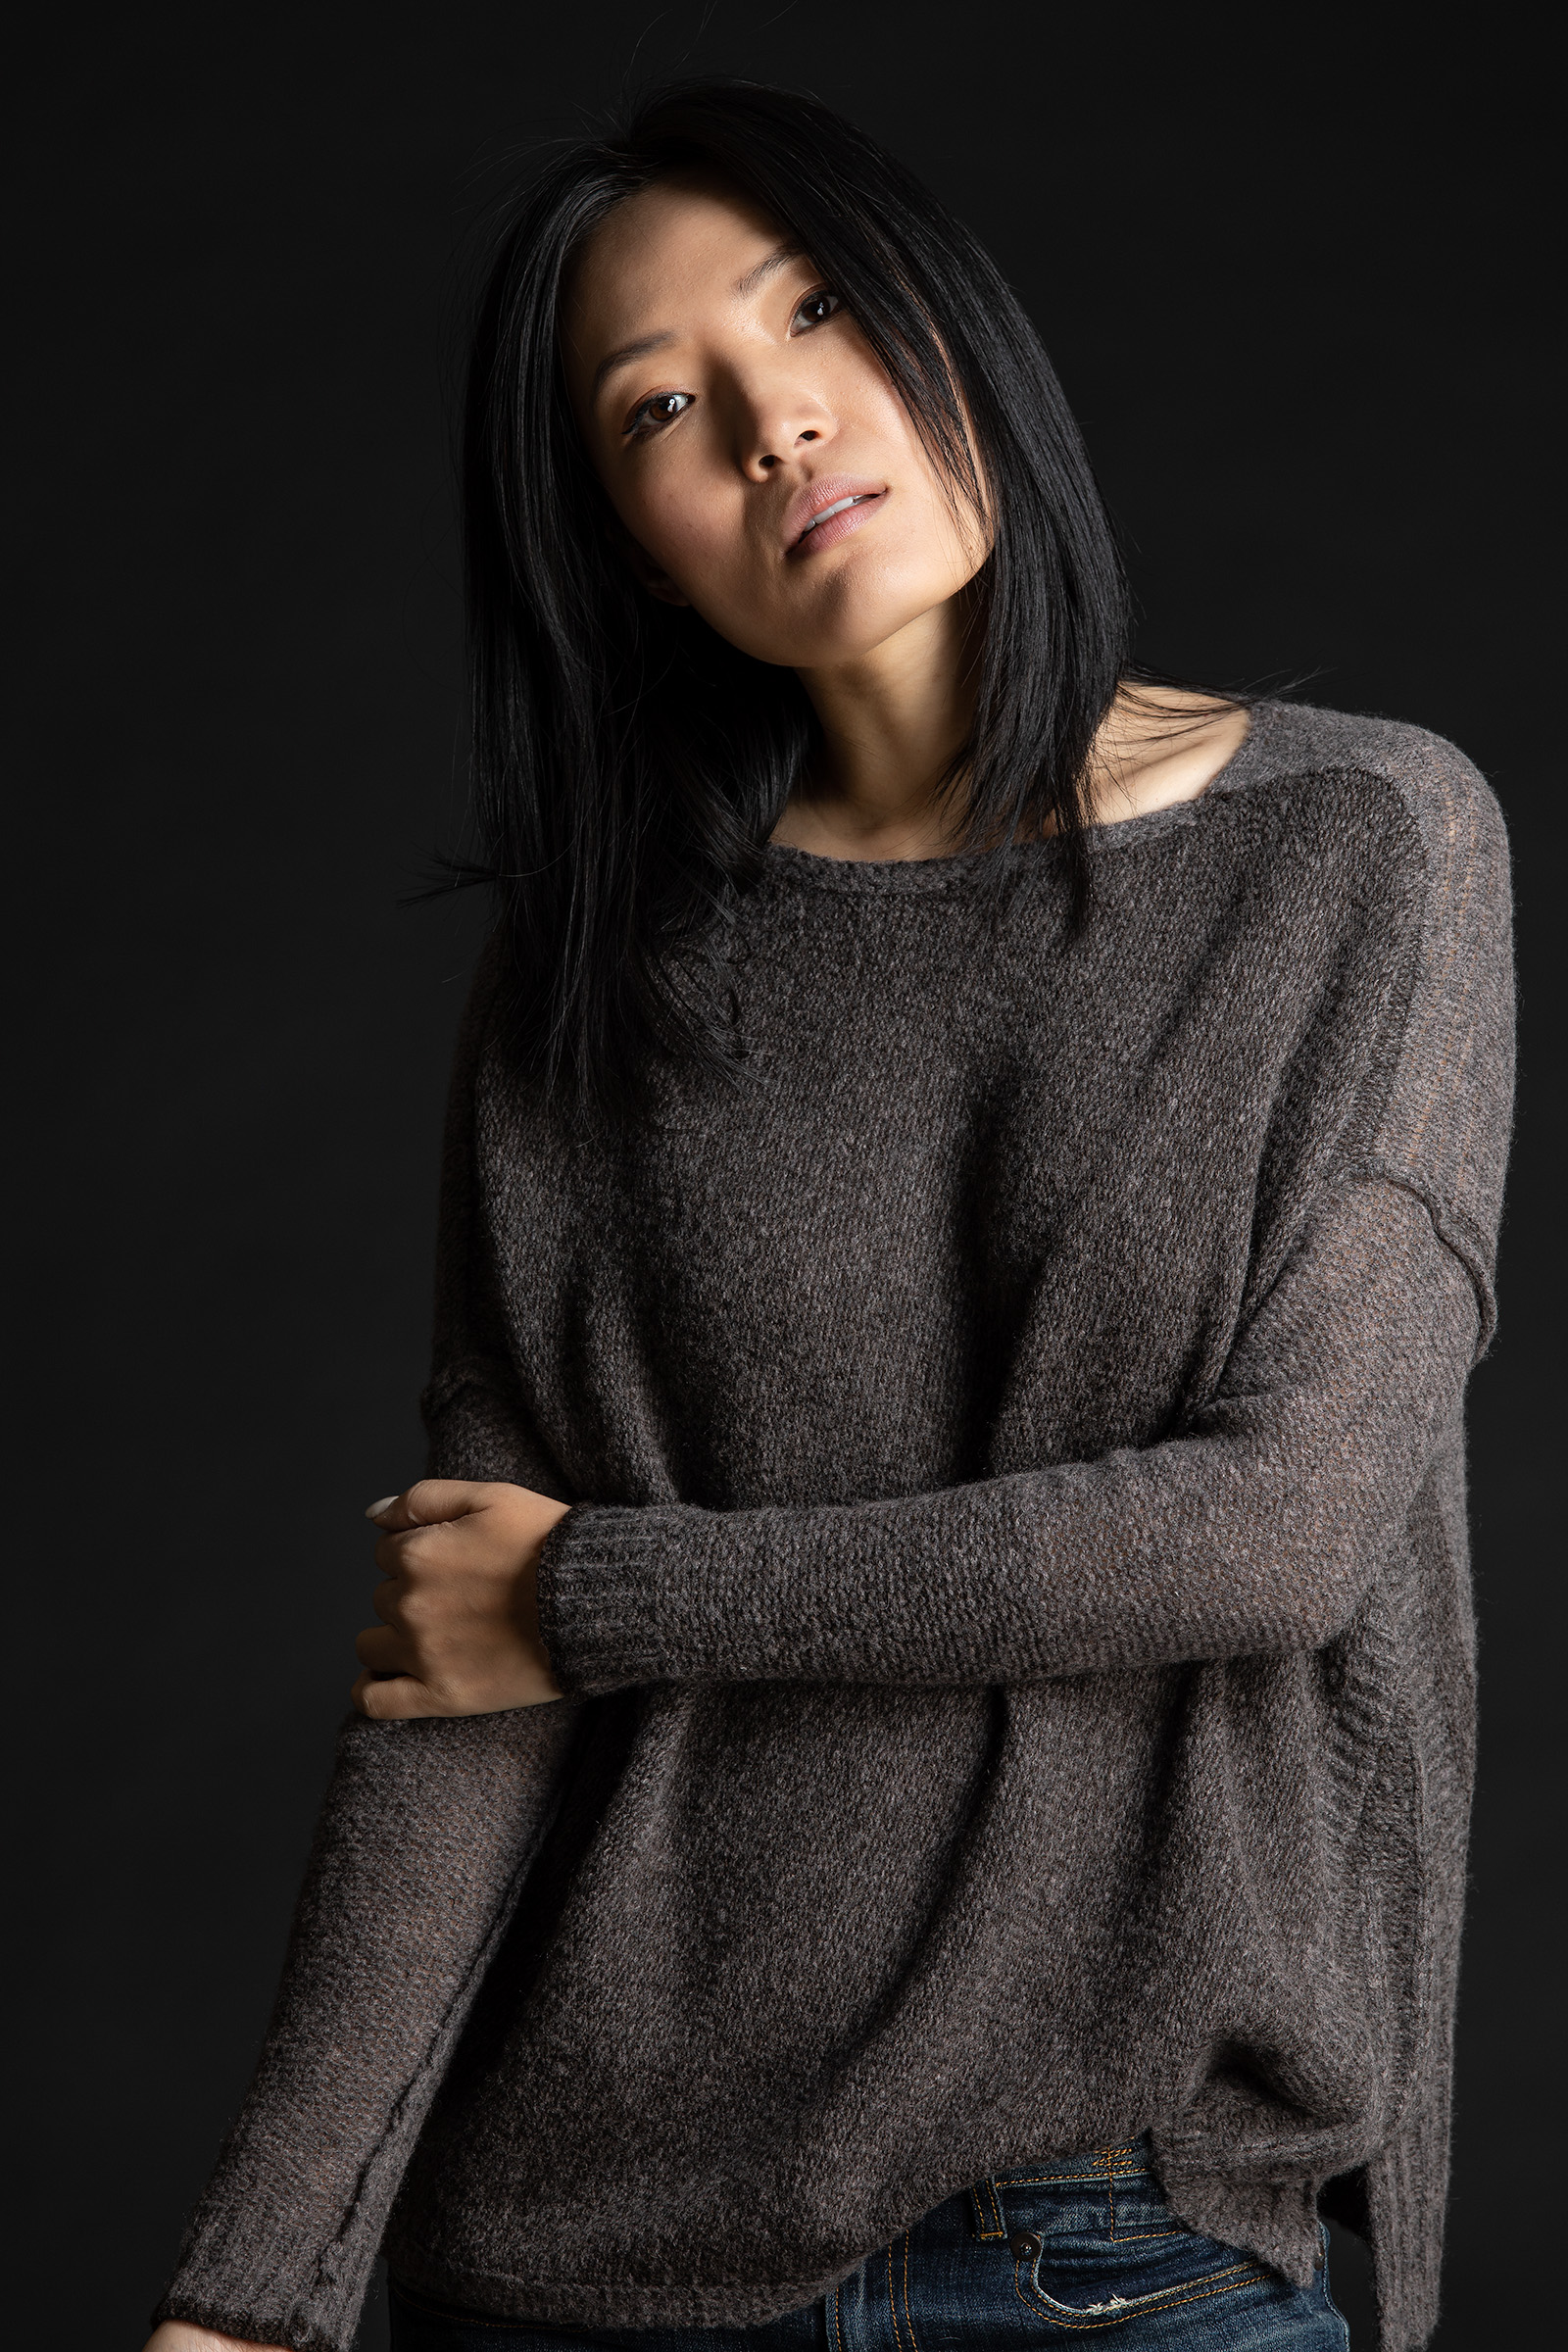 Paychi Guh | Dreamy Reversible Pullover, Musk/Chocolate, 100% Dreamy Cashmere